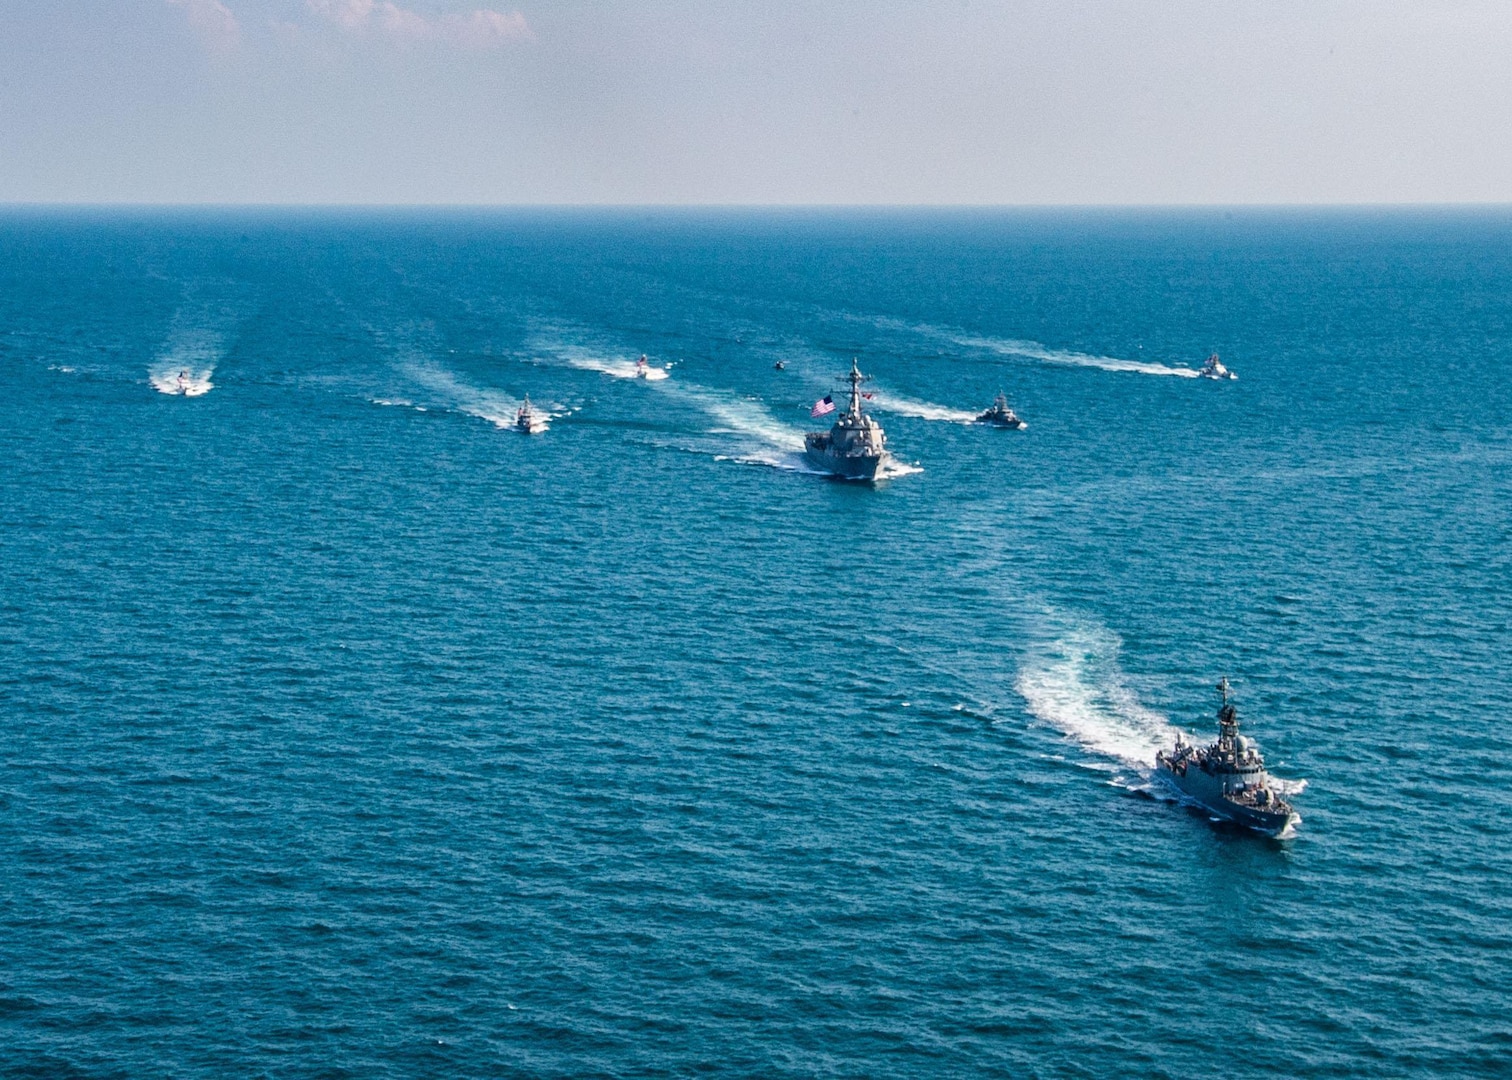 The Royal Saudi Naval Force corvette HMS Badr (612), front to back, the guided-missile destroyer USS Winston S. Churchill (DDG 81), center, Navy patrol coastal ships USS Squall (PC 7), USS Firebolt (PC 10), Coast Guard patrol boats USCGC Monomoy (WPB 1326), USCGC Maui (WPB 1304) and USCGC Wrangell (WPB 1332) transit the Arabian Gulf during the joint and combined air operations in support of maritime surface warfare (AOMSW) exercise in the Arabian Gulf, Dec. 17. Combined integration operations between joint U.S. forces are regularly held to maintain interoperability and the capability to counter threats posed in the maritime domain, ensuring freedom of navigation and free flow of commerce throughout the region's heavily trafficked waterways.